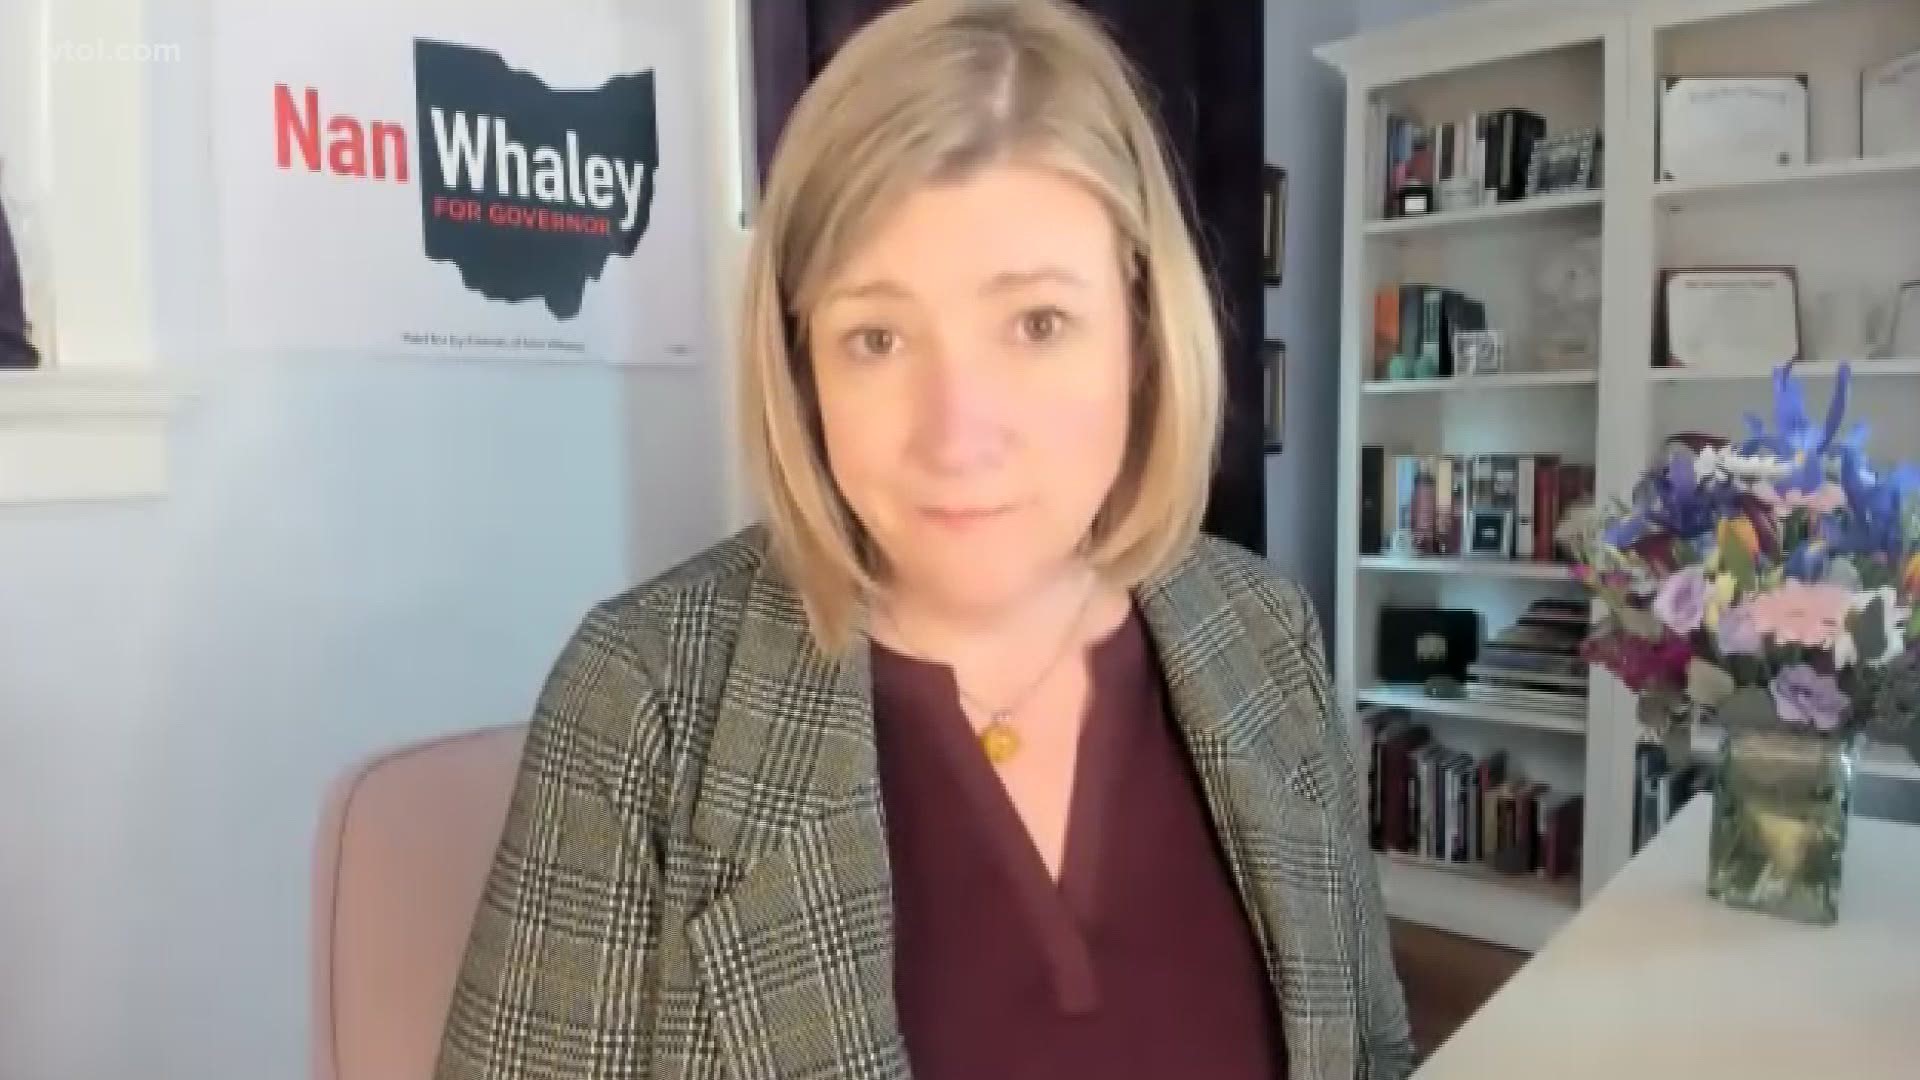 Whaley ran in the last gubernatorial race but dropped out.